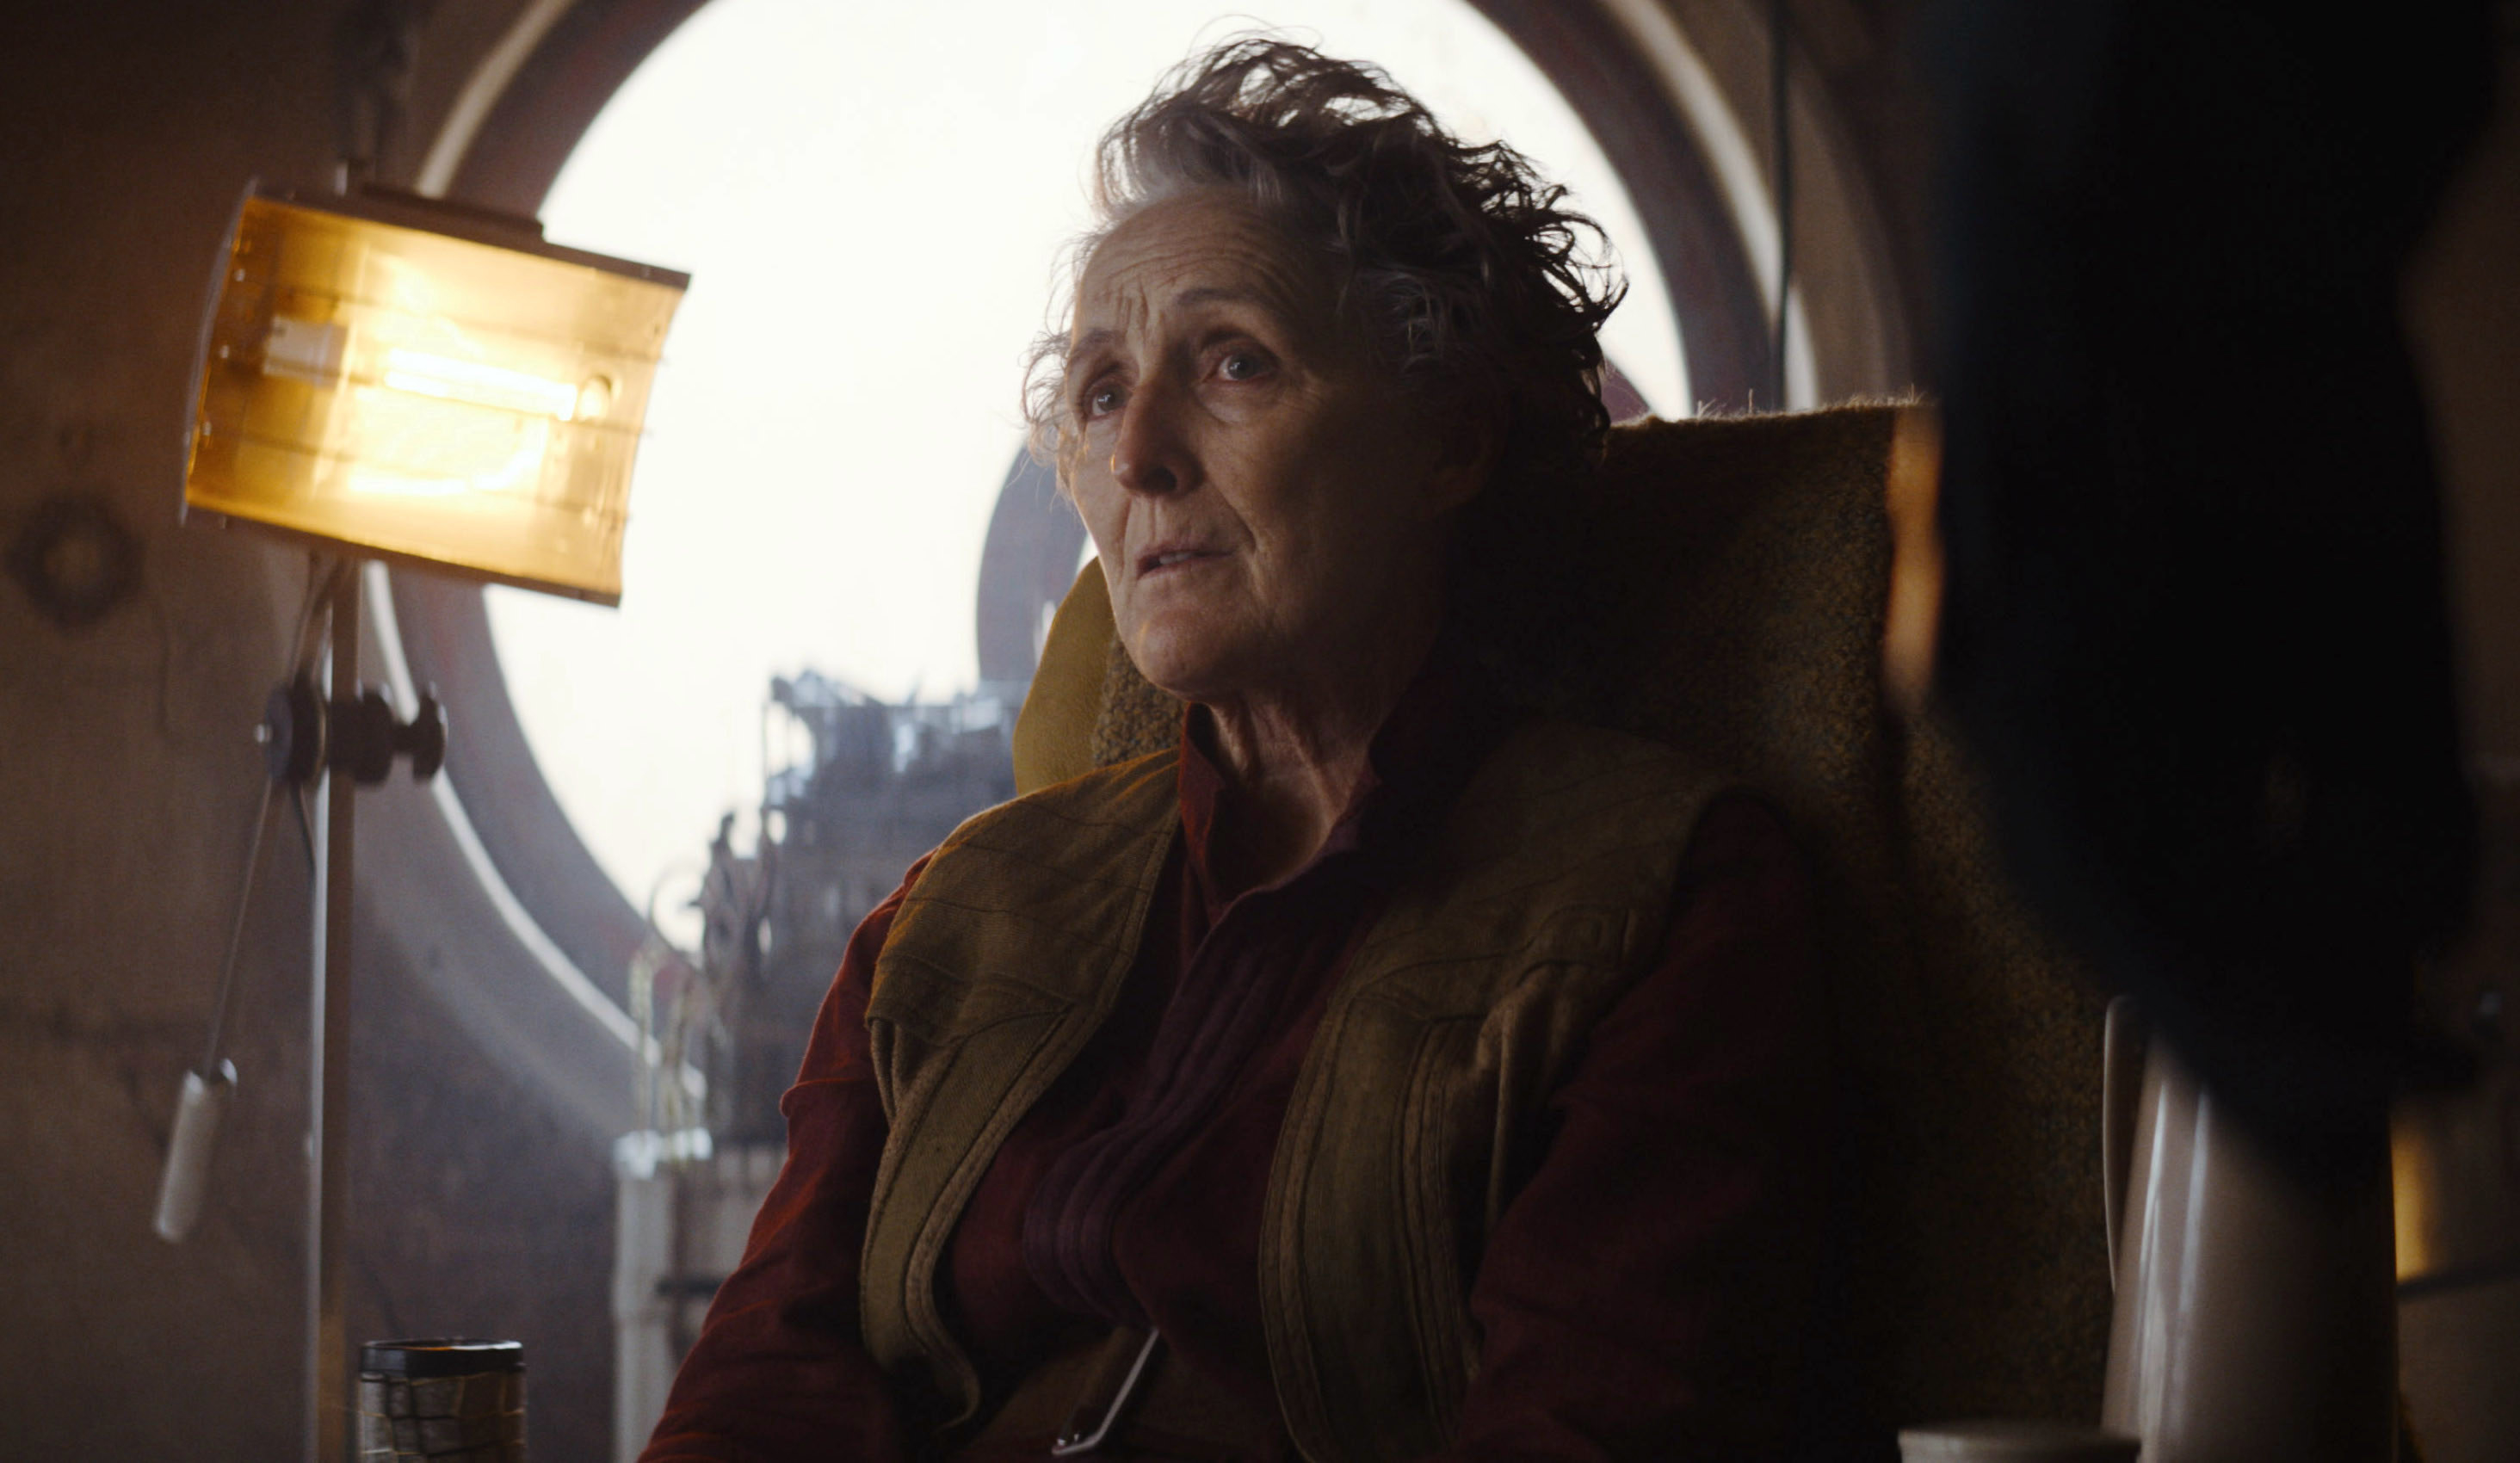 An old woman played by fiona shaw sits in an office with a lamp and a round window and looks at something out of frame with a disconcerted look